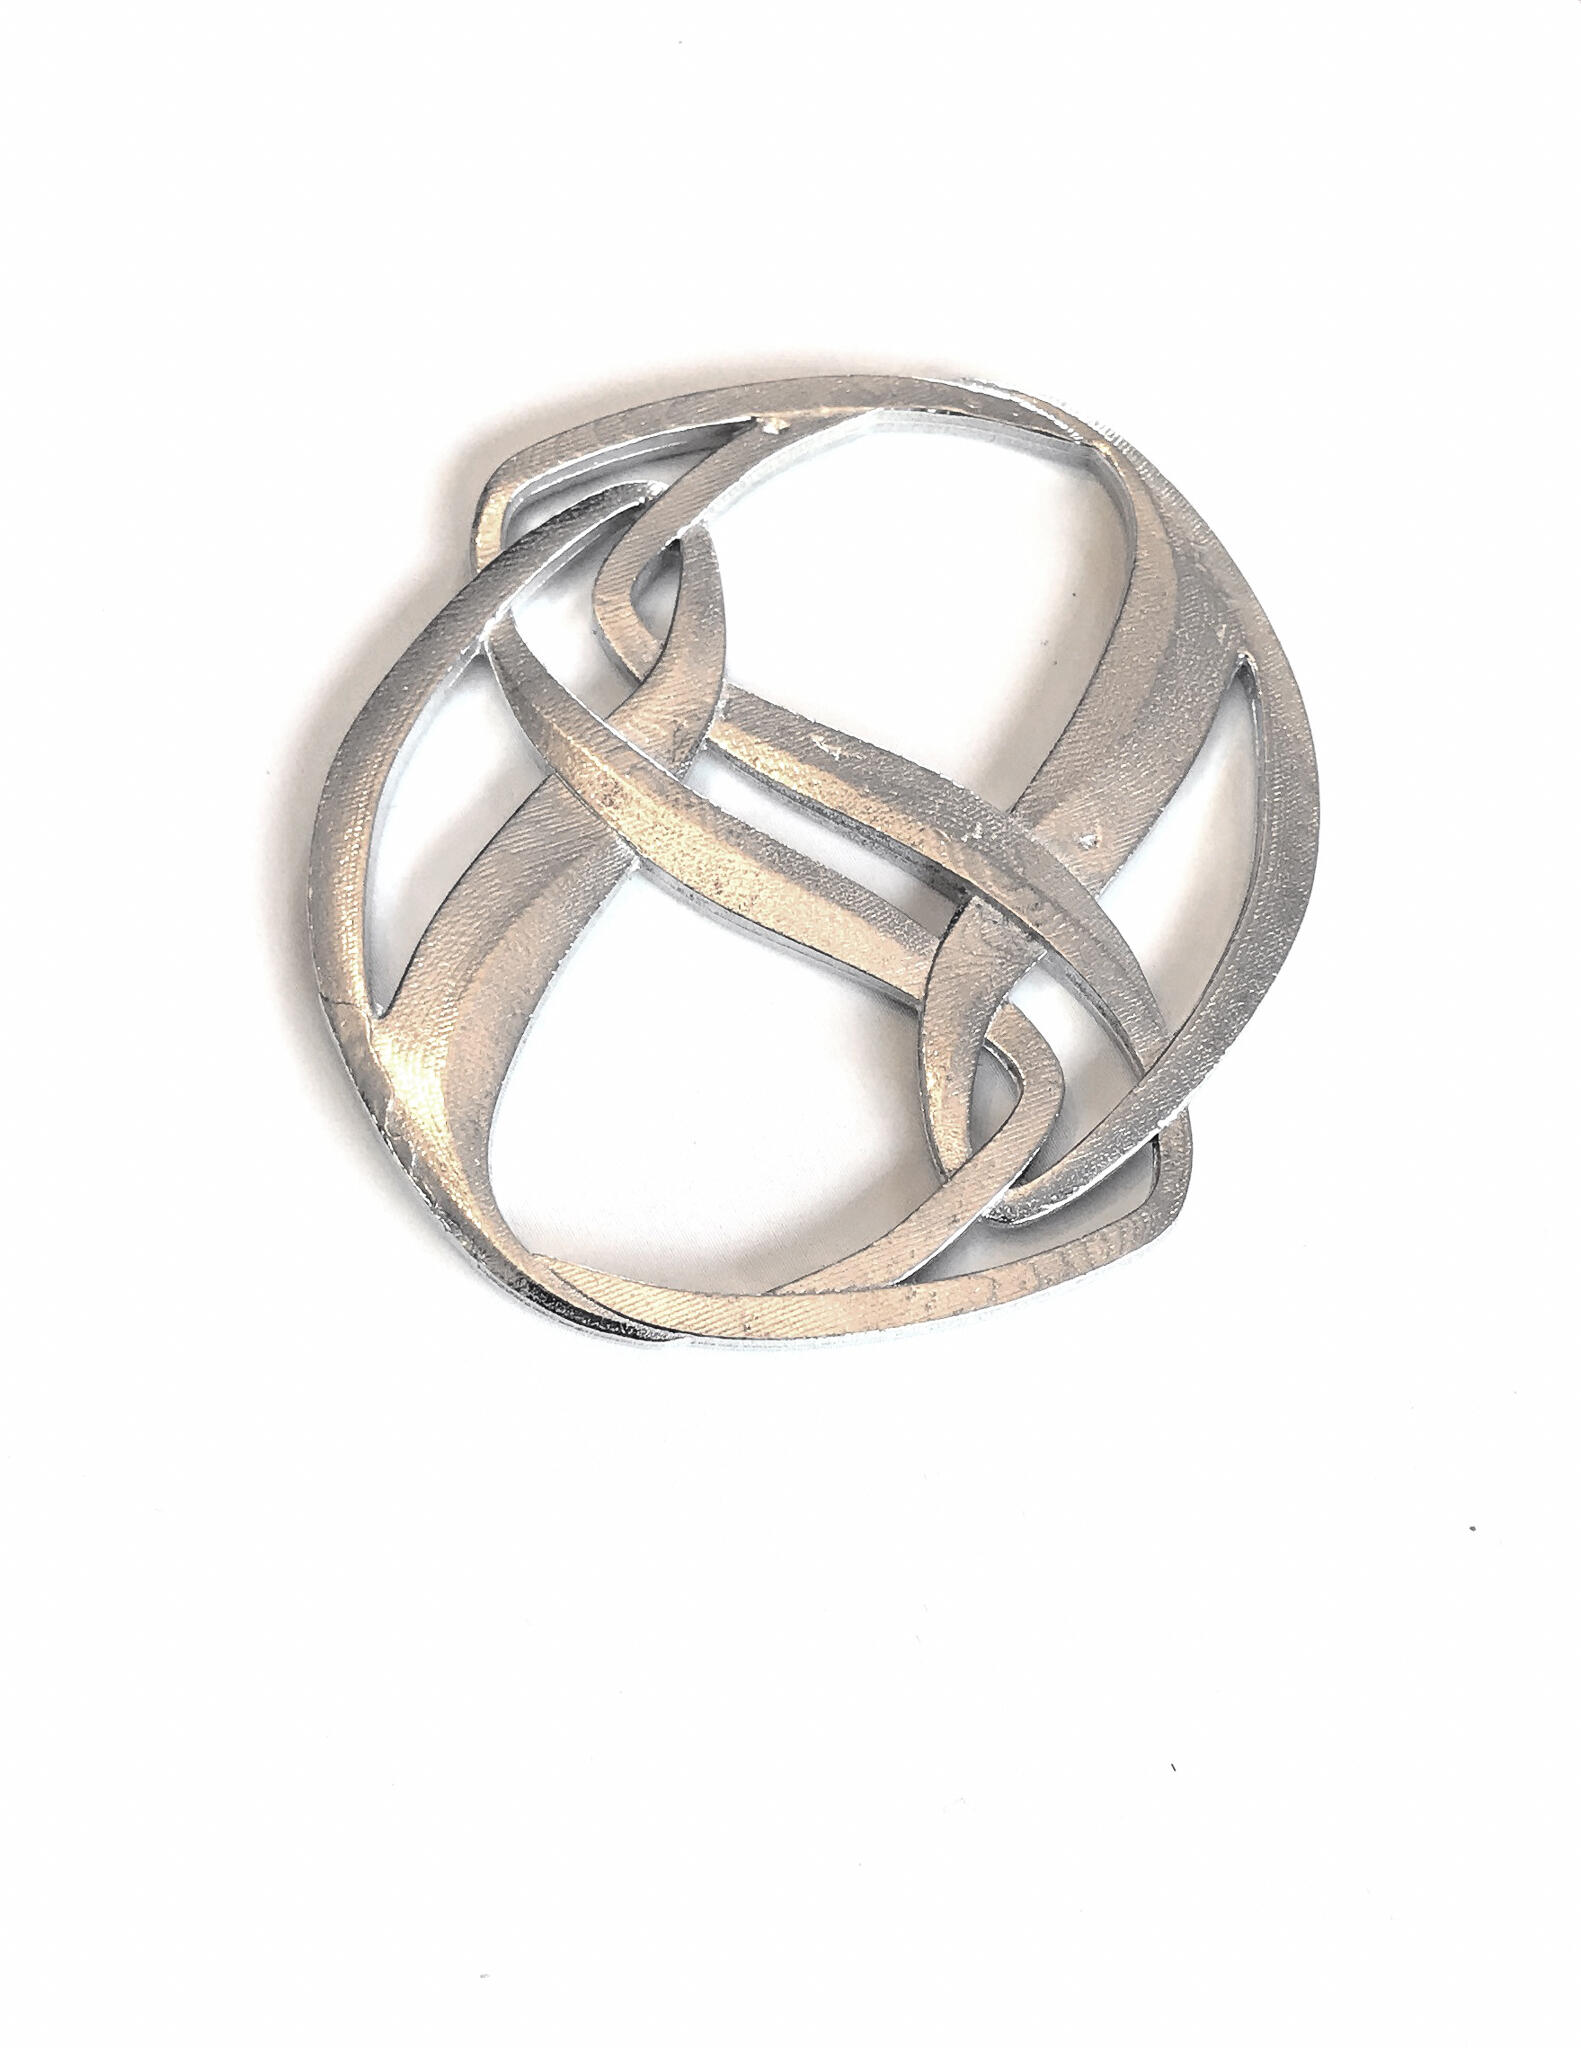 Oval Infinity Scarf Ring and Slide – House of Morgan Pewter